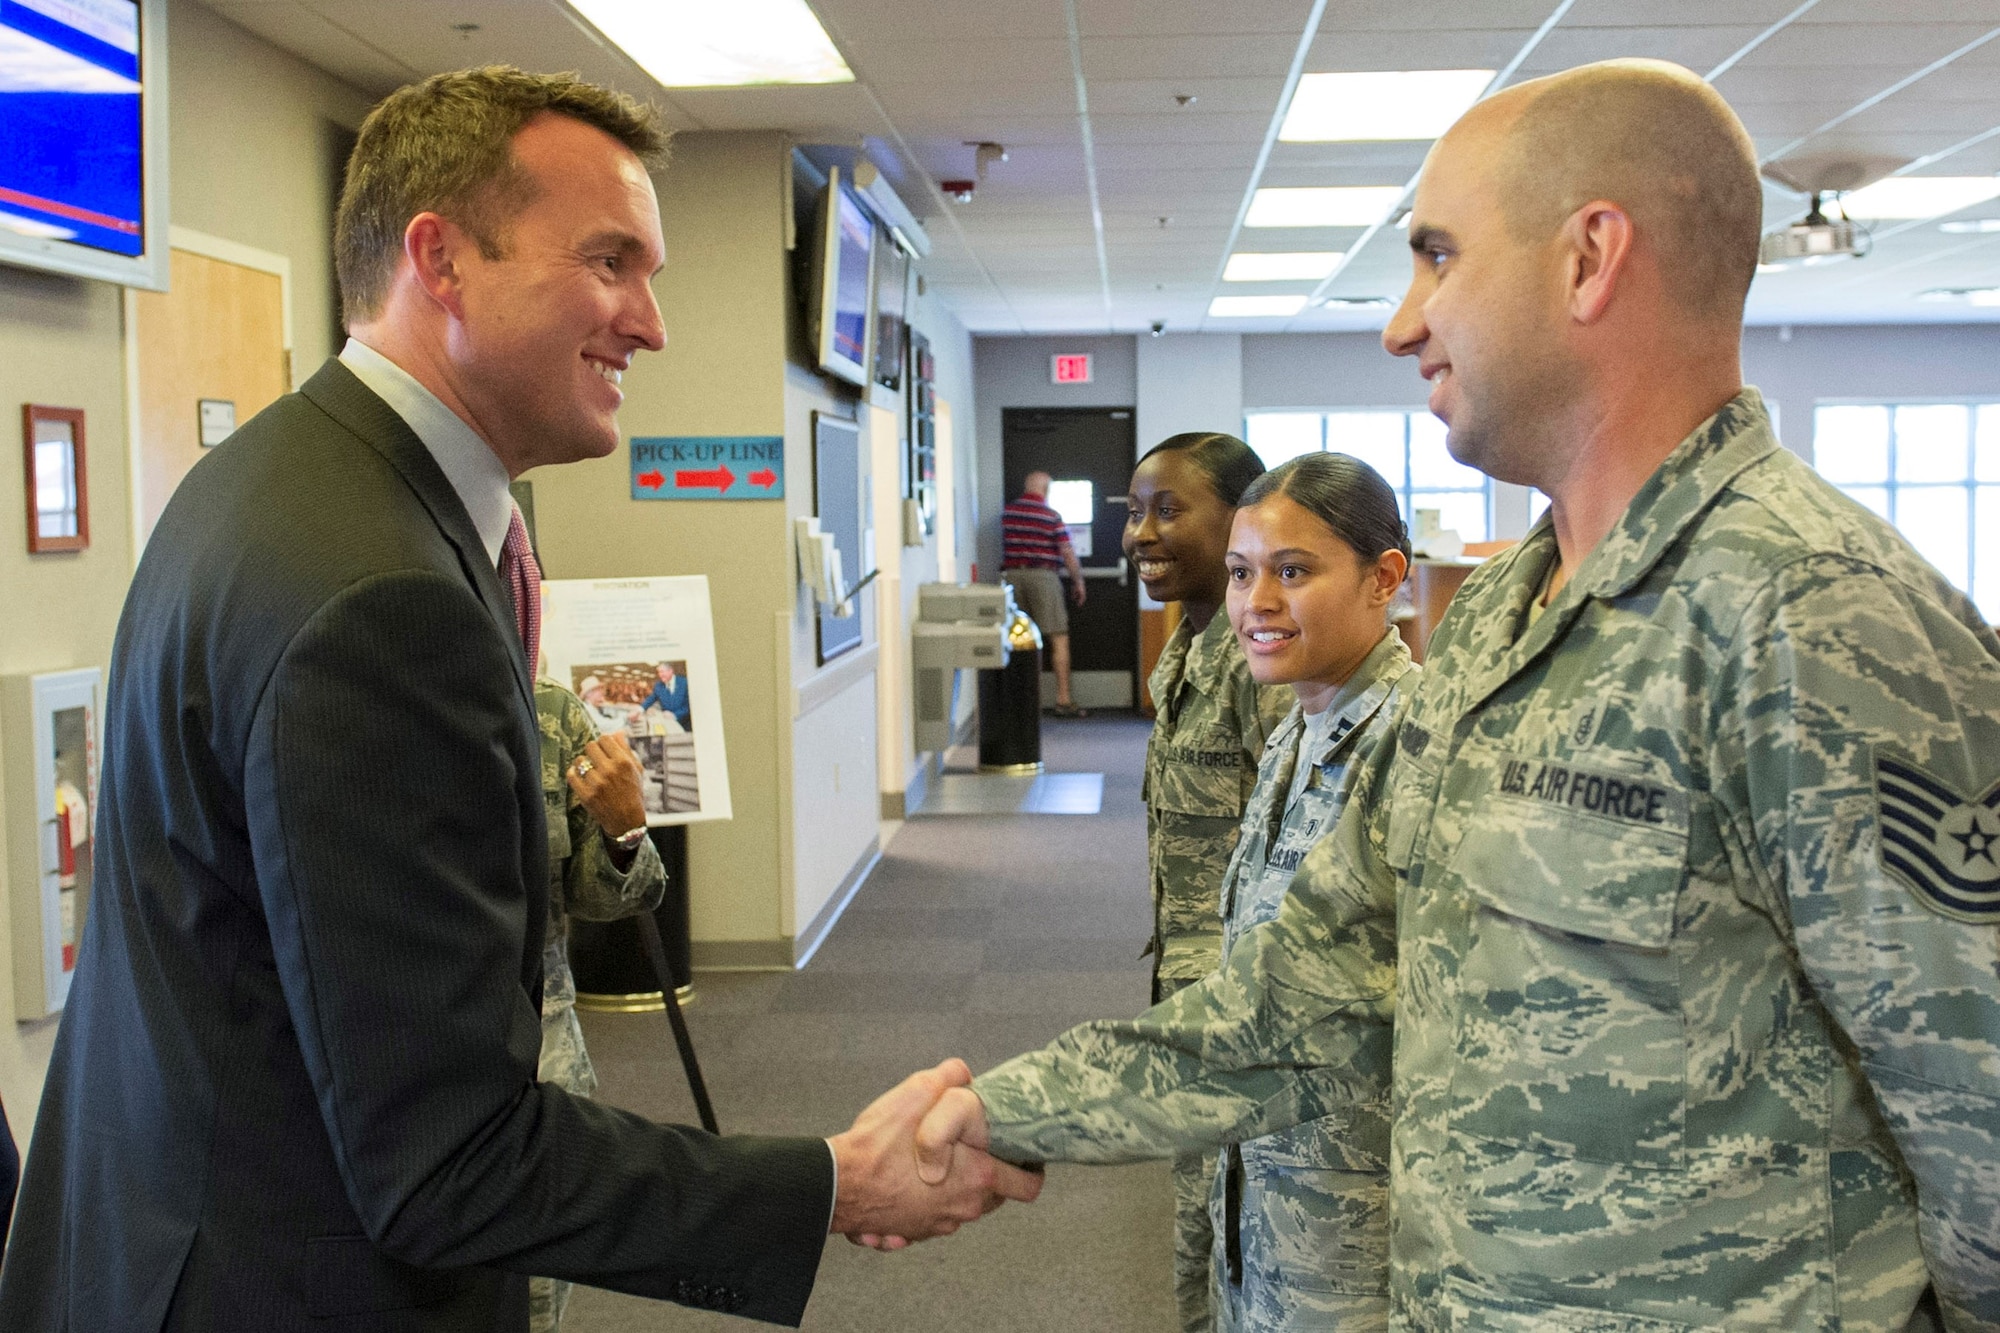 Acting Secretary of the Air Force Eric Fanning meets with pharmacy staff members (right to left) Tech. Sgt. Jason Borondy, Capt. Jessica Pabon and Staff Sgt. Tanisha Cathren during his visit of the Patrick Air Force Base Satellite Pharmacy Aug. 8, 2013. Borondy is the NCO in charge of the Satellite Pharmacy Element. Pabon is the , officer in charge of the Satellite Pharmacy Element. Cathren is a pharmacy technician. (U.S. Air Force photo/Matthew Jurgens)